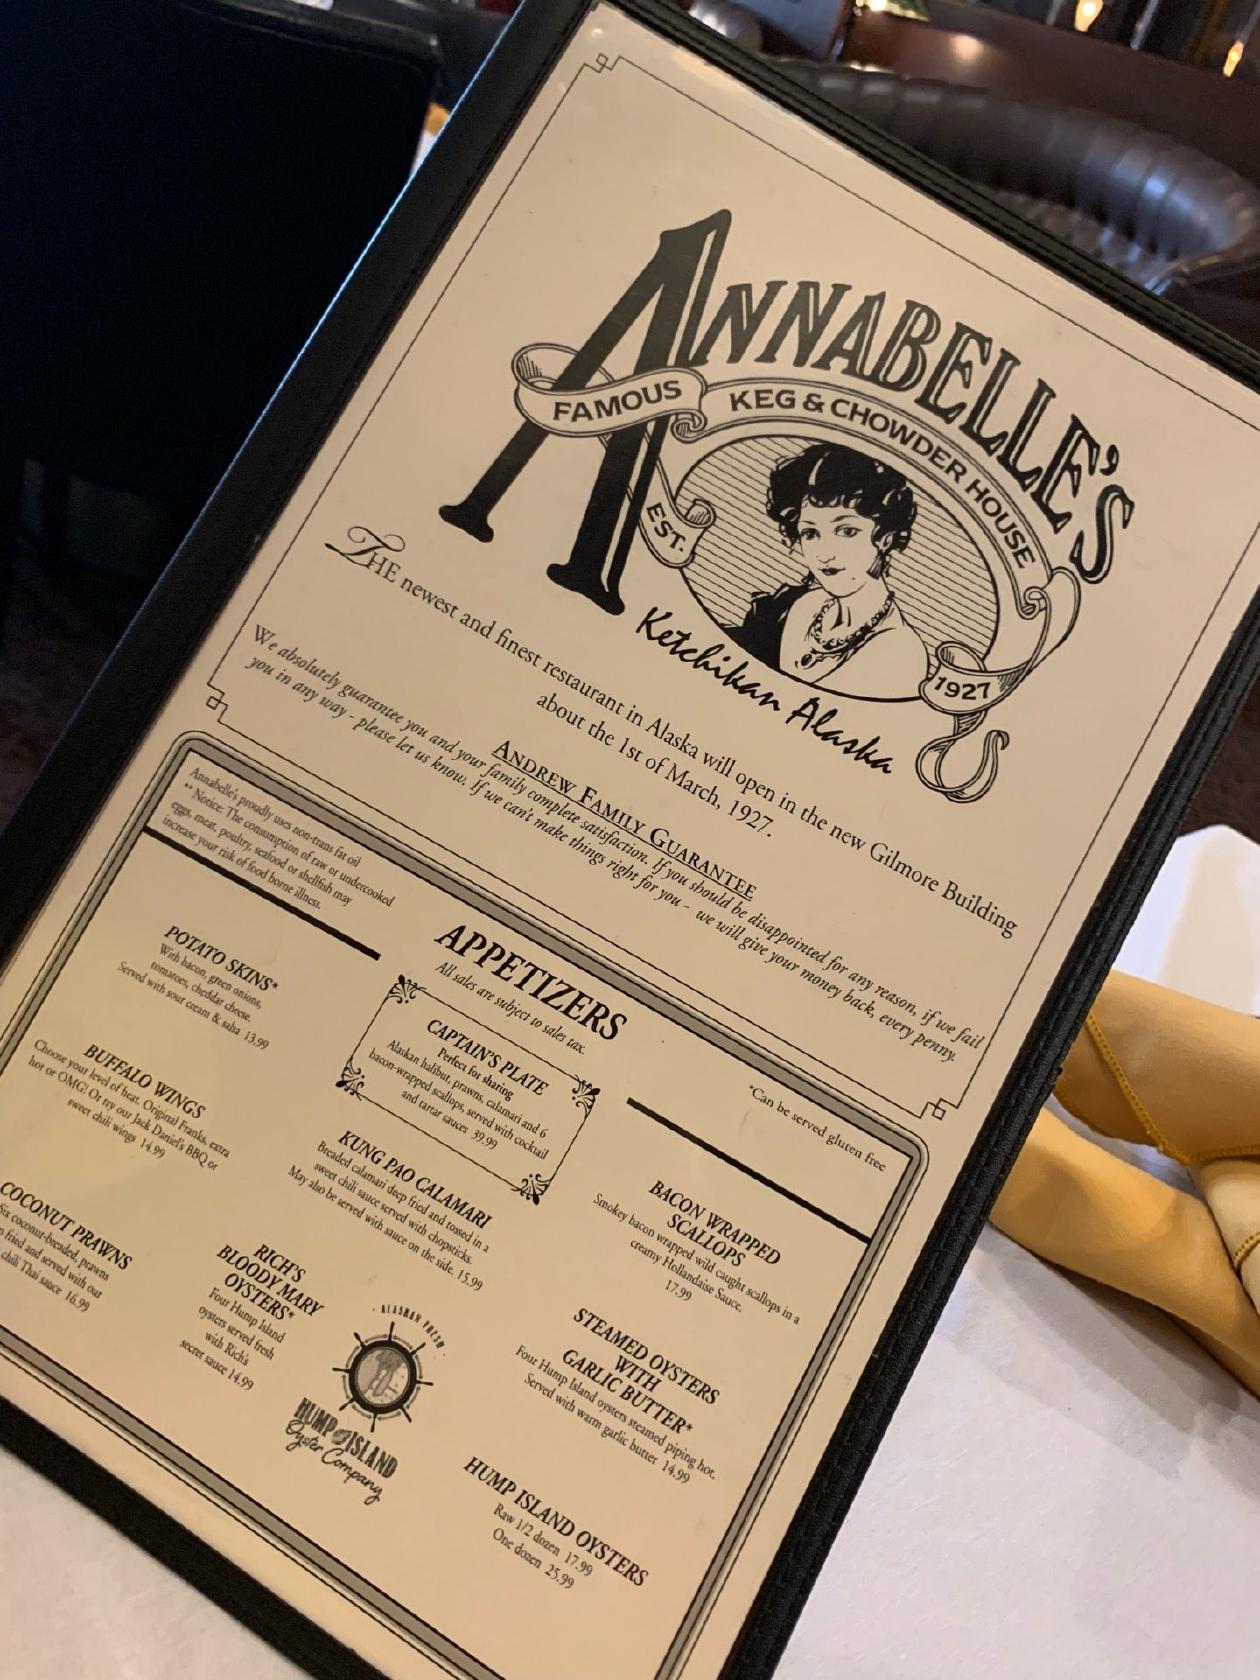 Menu at Annabelle's Famous Keg and Chowder House restaurant, Ketchikan